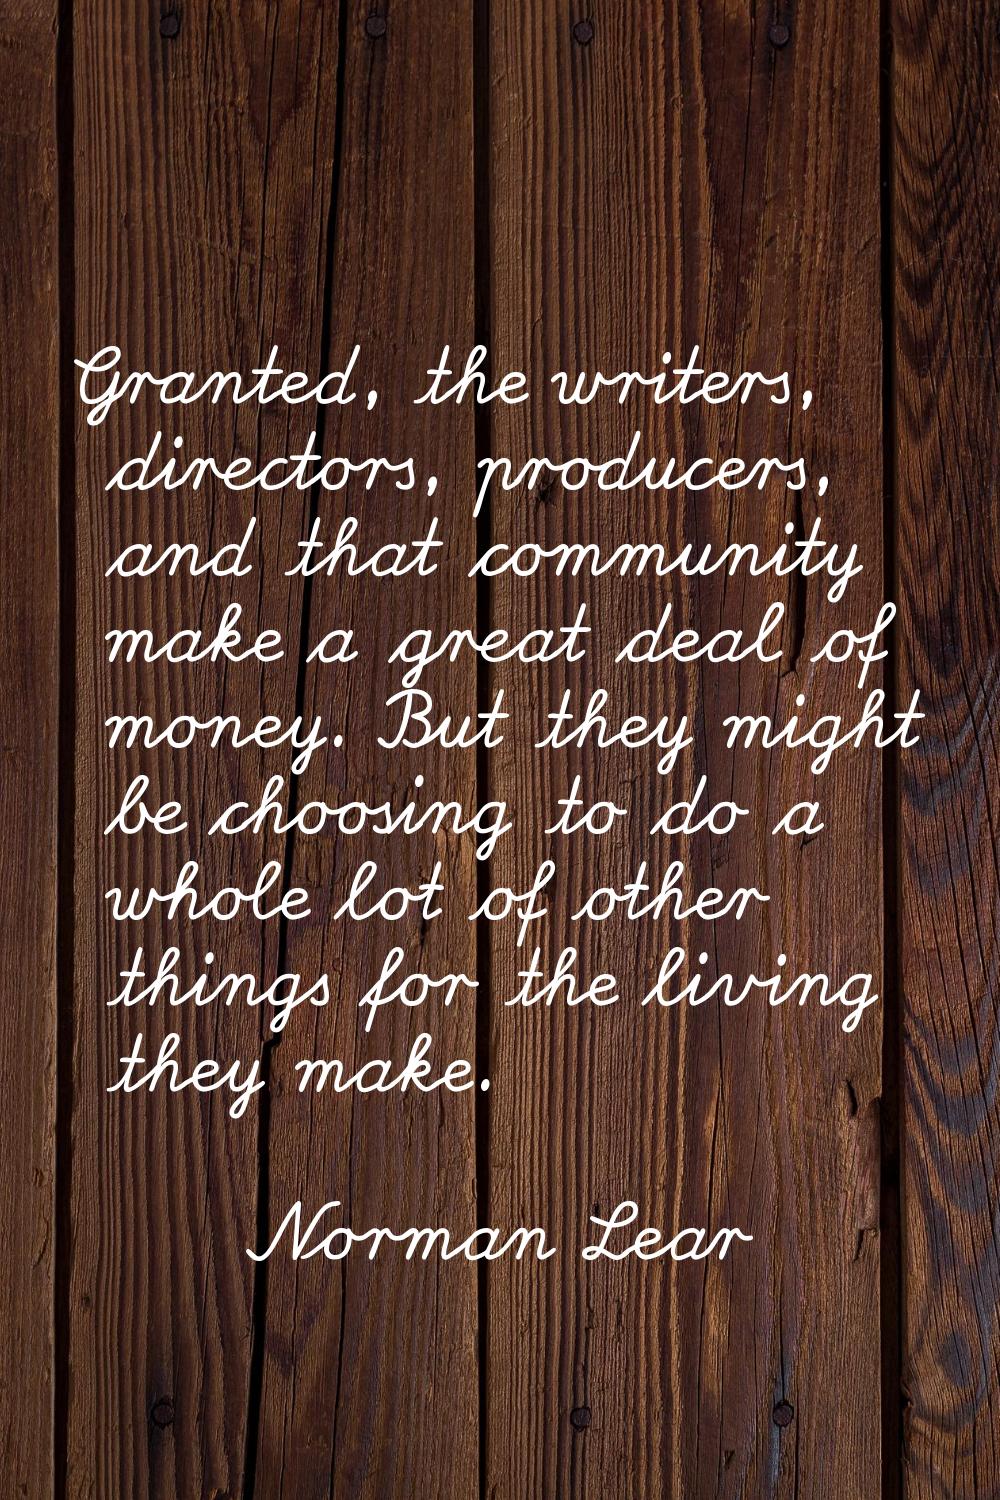 Granted, the writers, directors, producers, and that community make a great deal of money. But they